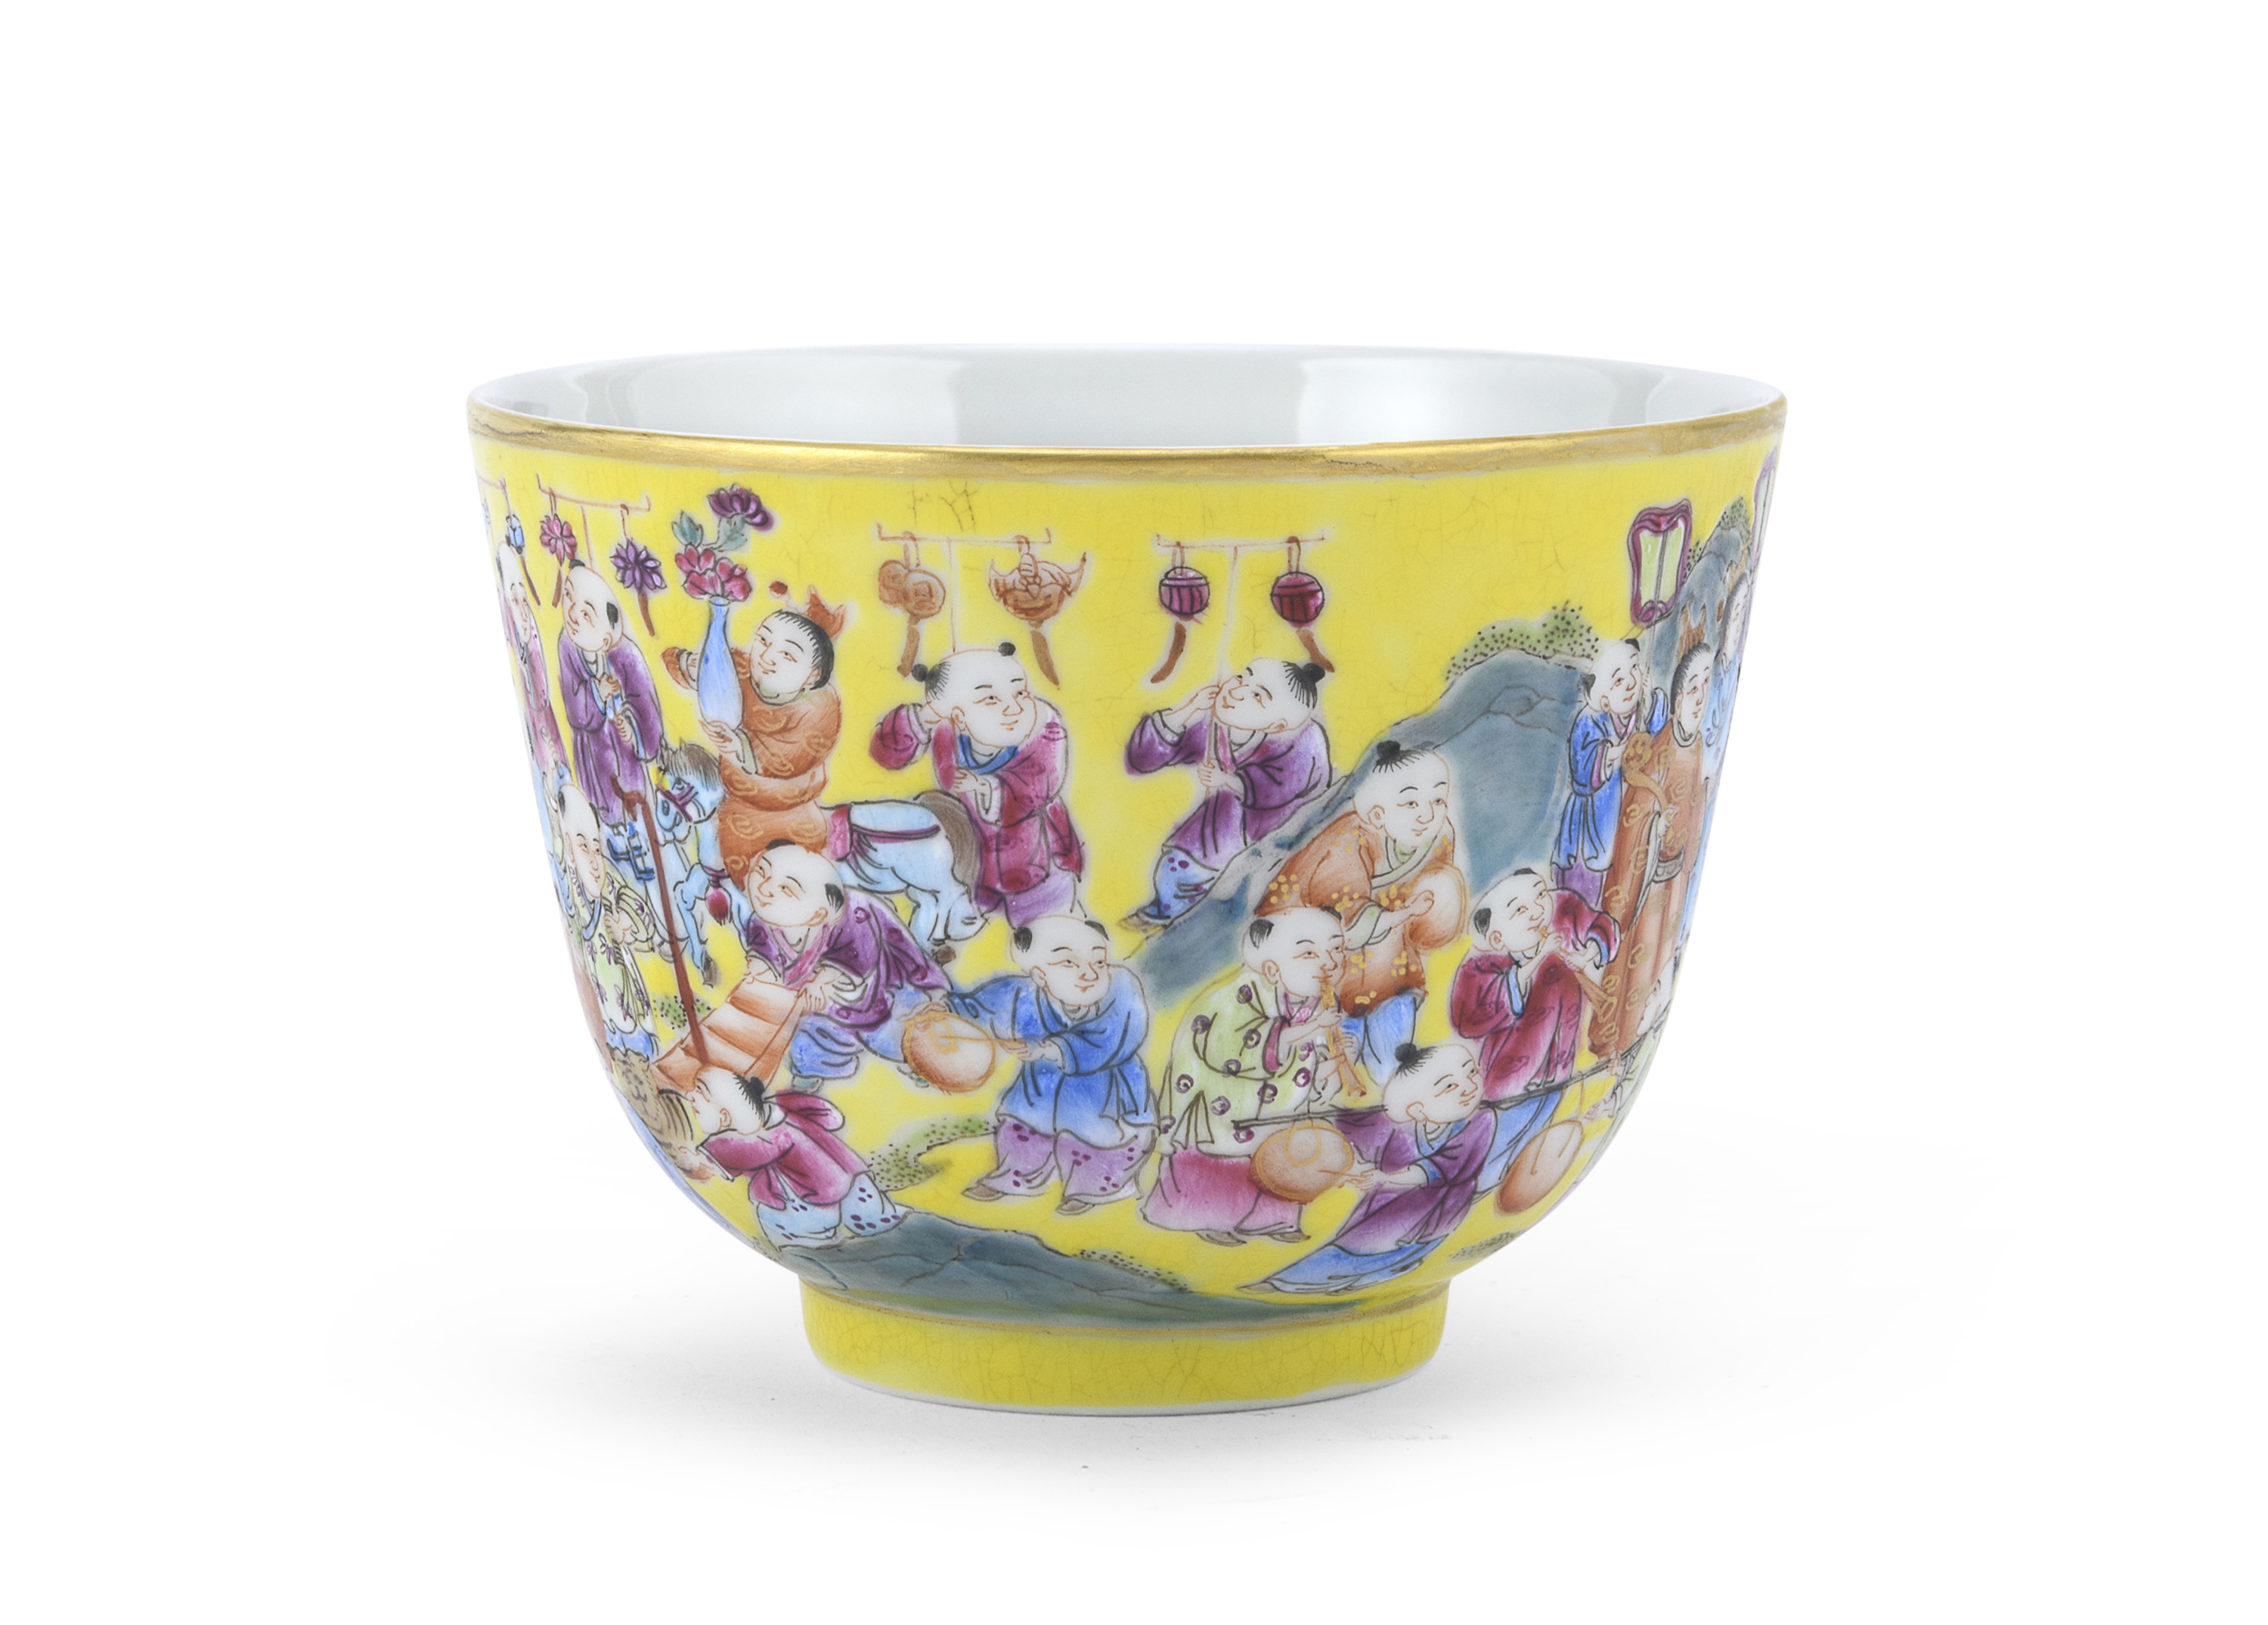 A CHINESE POLYCHROME AND GOLD ENAMELED PORCELAIN CUP FIRST HALF 20TH CENTURY.